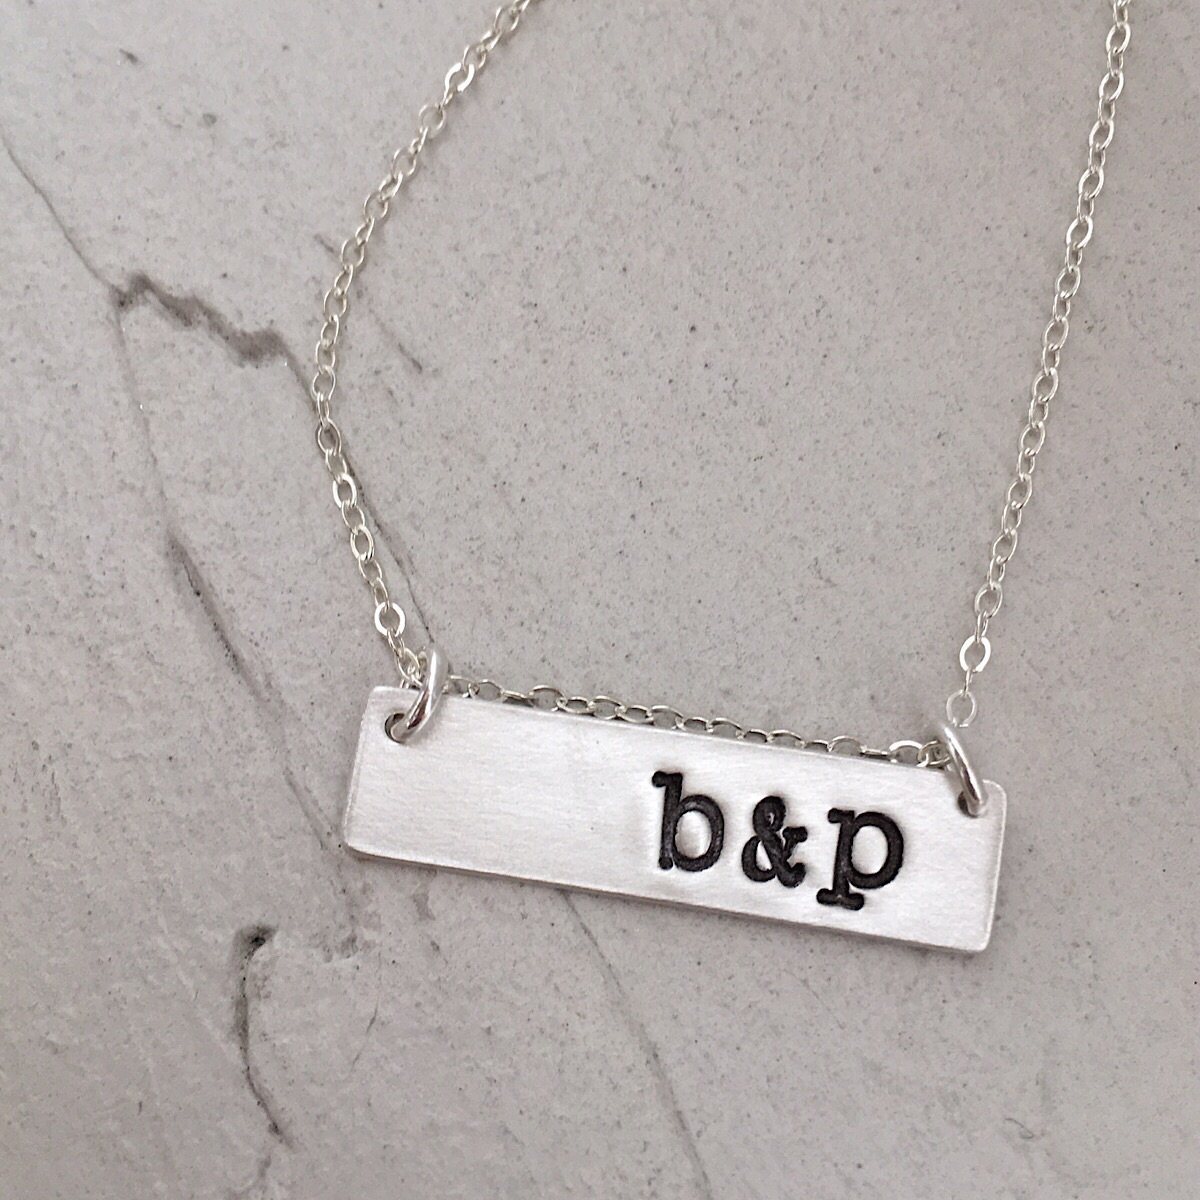 Initial Bar Necklace - IsabelleGraceJewelry